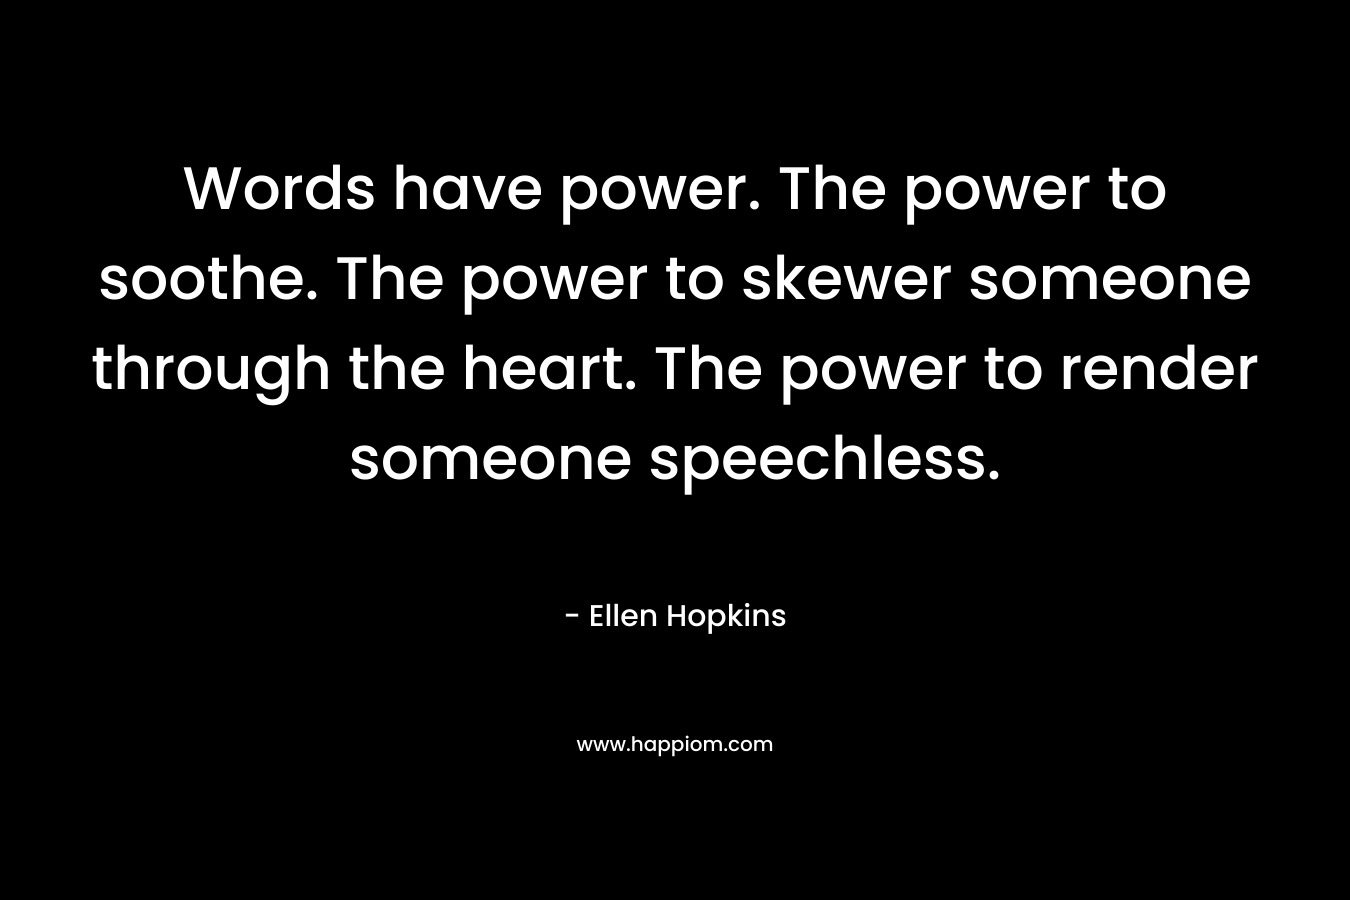 Words have power. The power to soothe. The power to skewer someone through the heart. The power to render someone speechless. – Ellen Hopkins